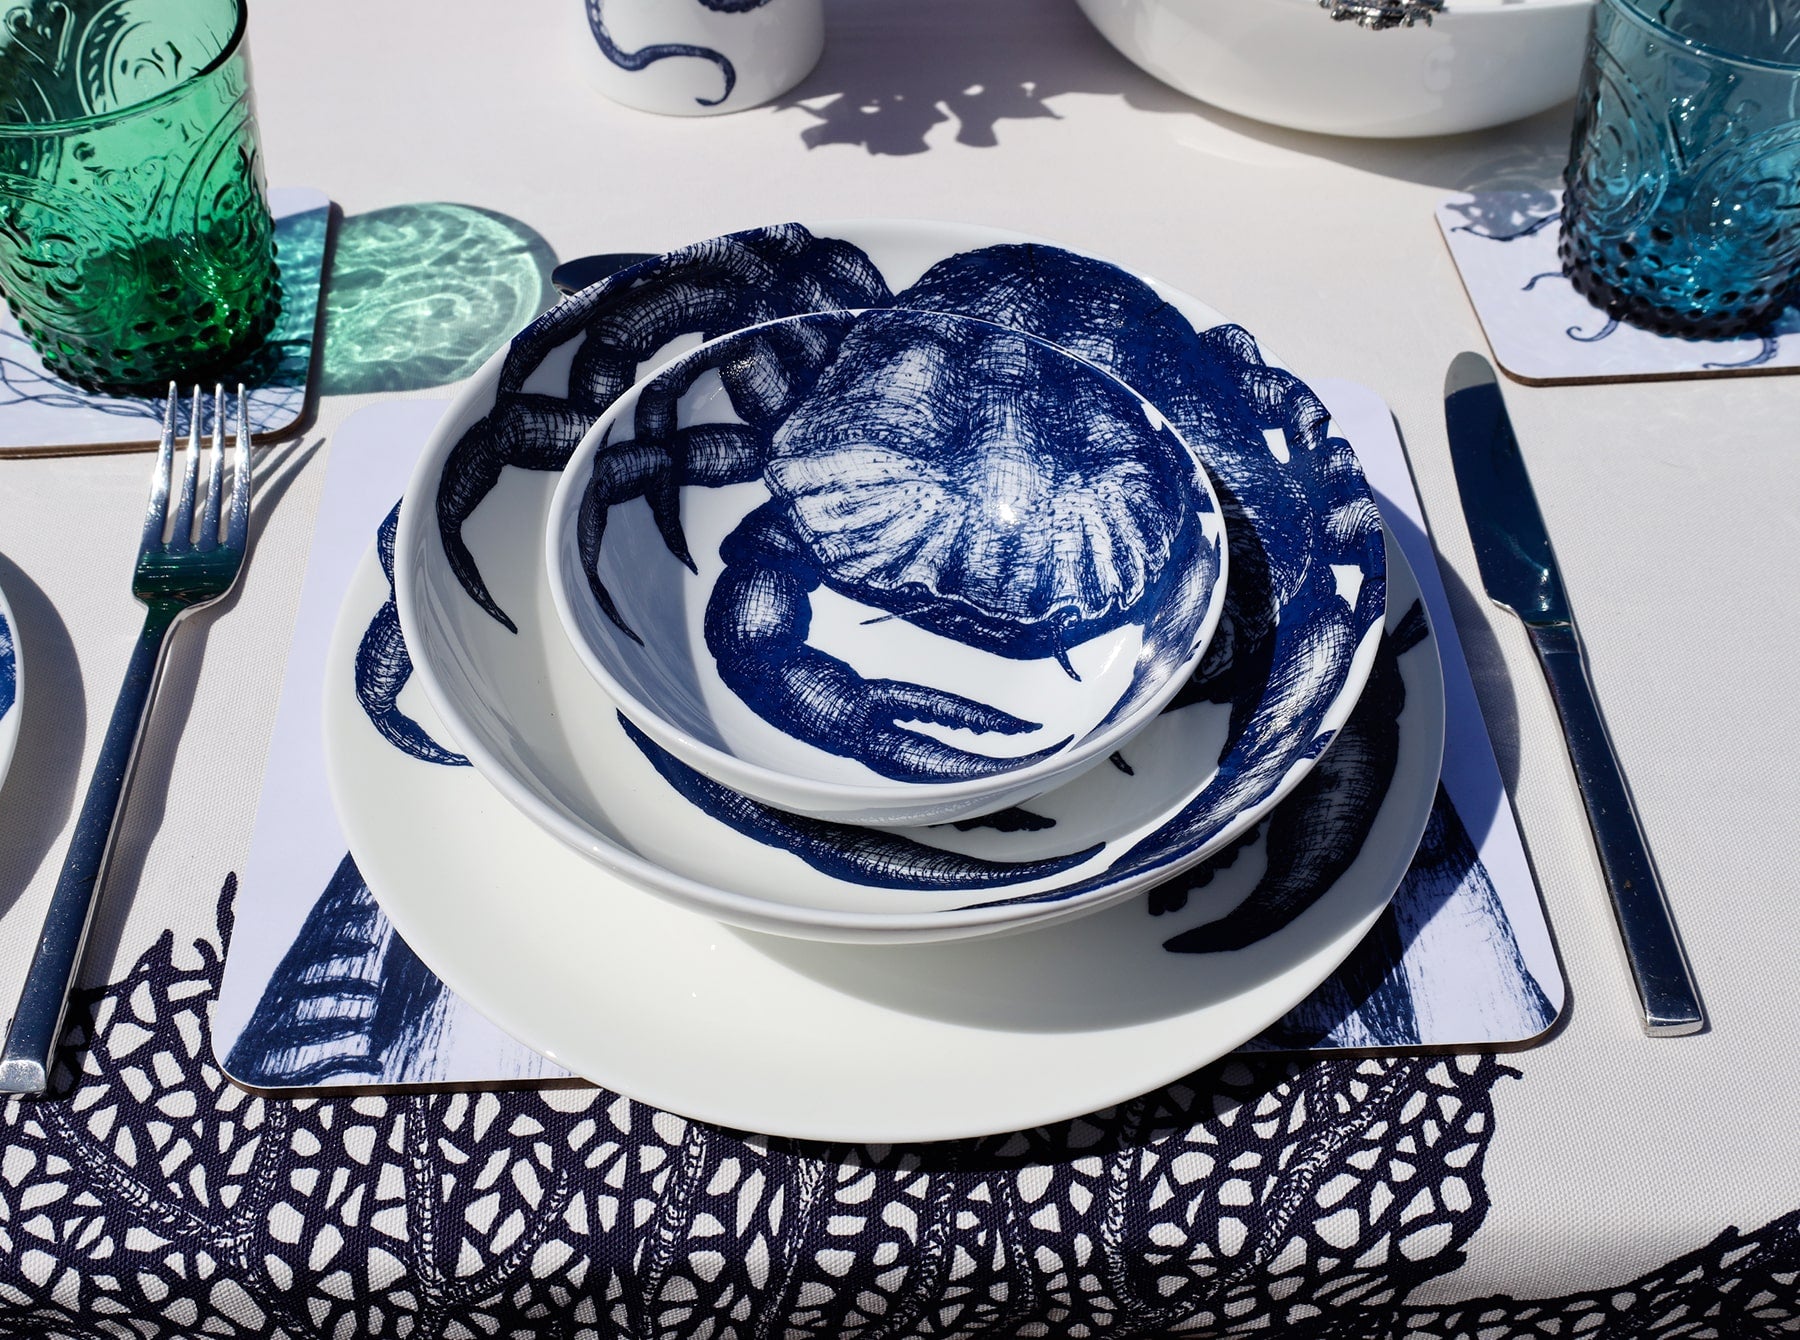 Outside Table setting with Large Crab plates,stacked with the bowls on a placemat,next to a coaster with a blue glass.